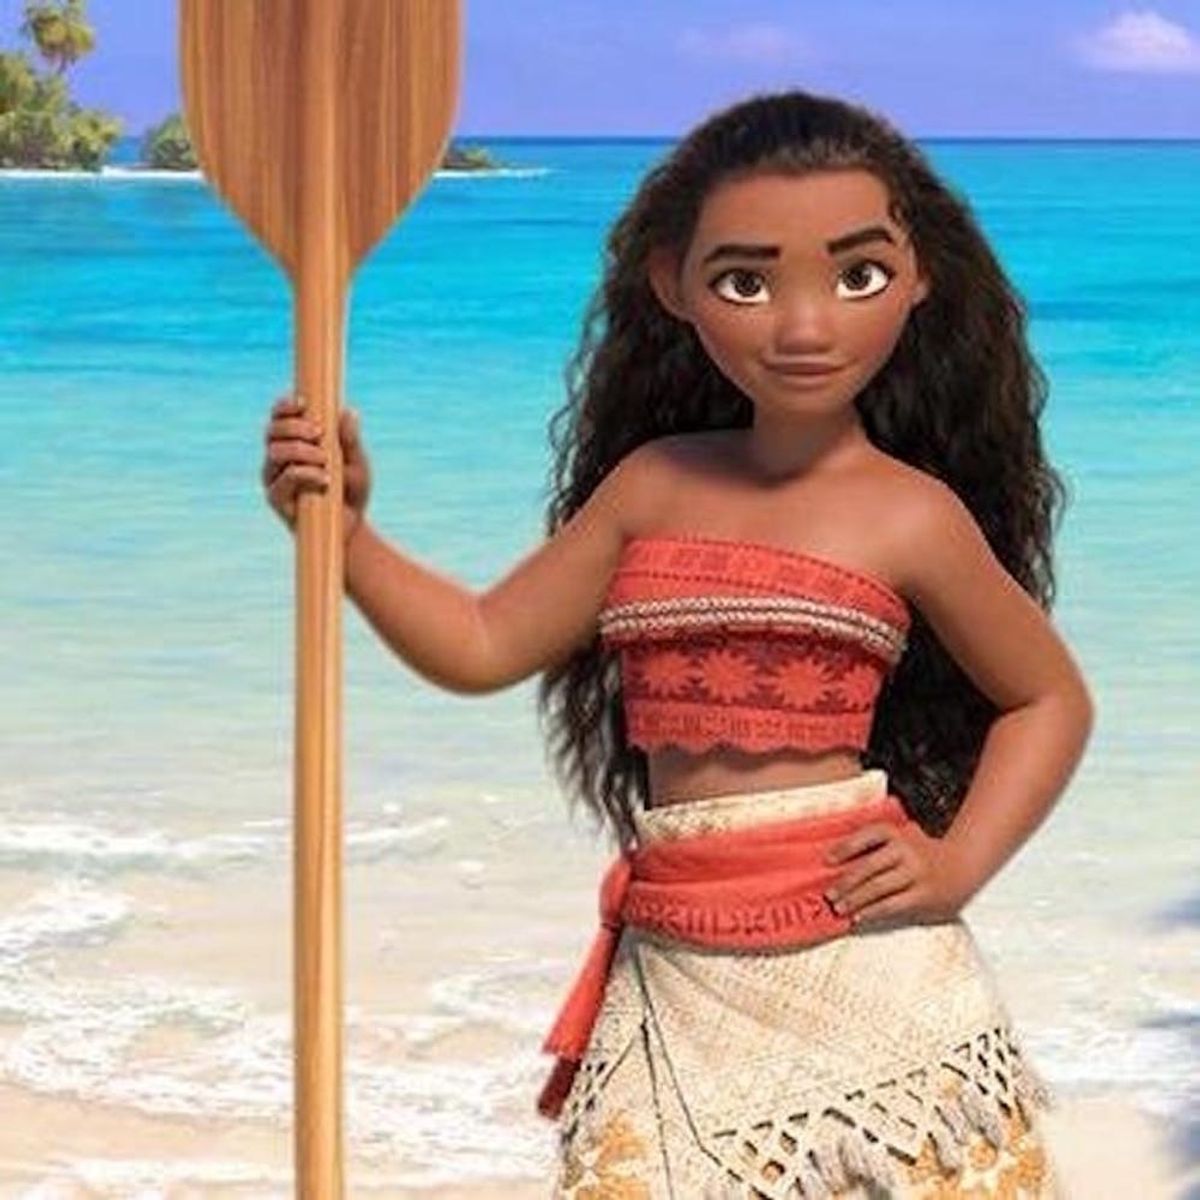 Moana Christmas Tree Ornaments Are the Perfect Way to Bring Some Inspiration to Your Holiday